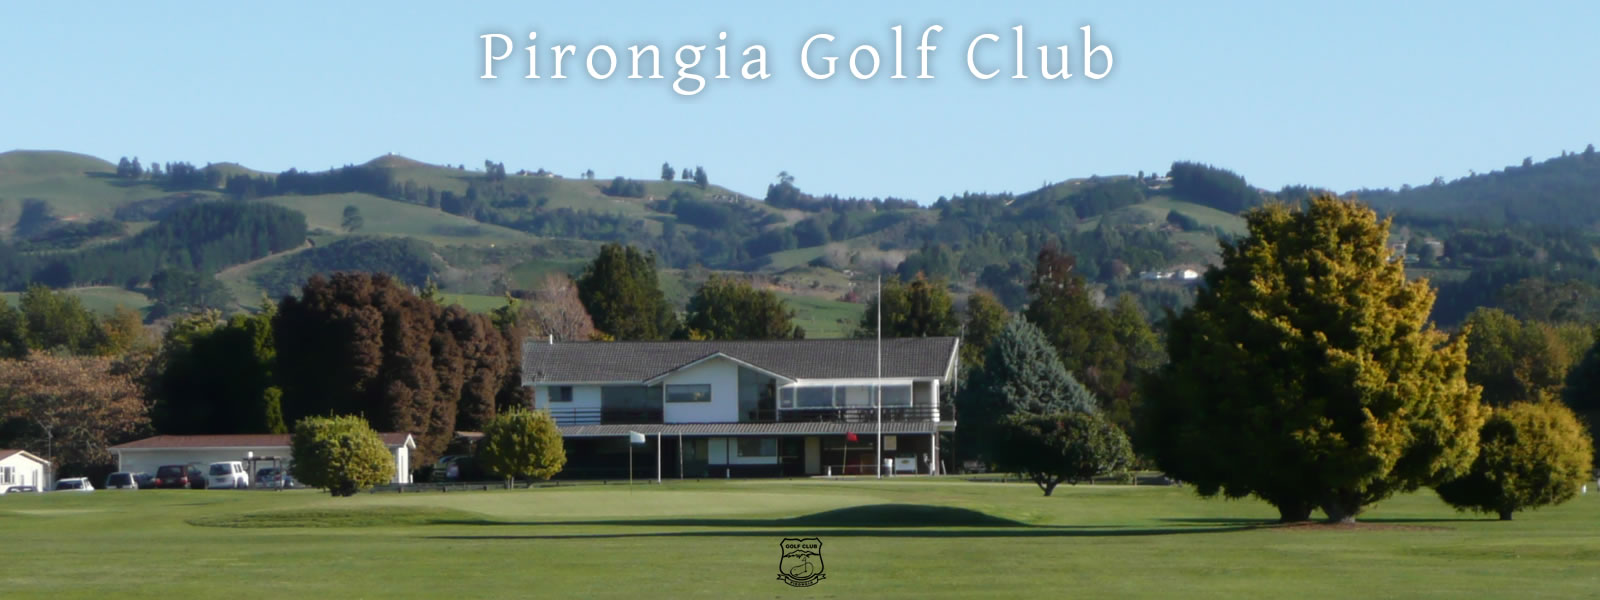 Pirongia Golf Club - a beautiful 18 hold course